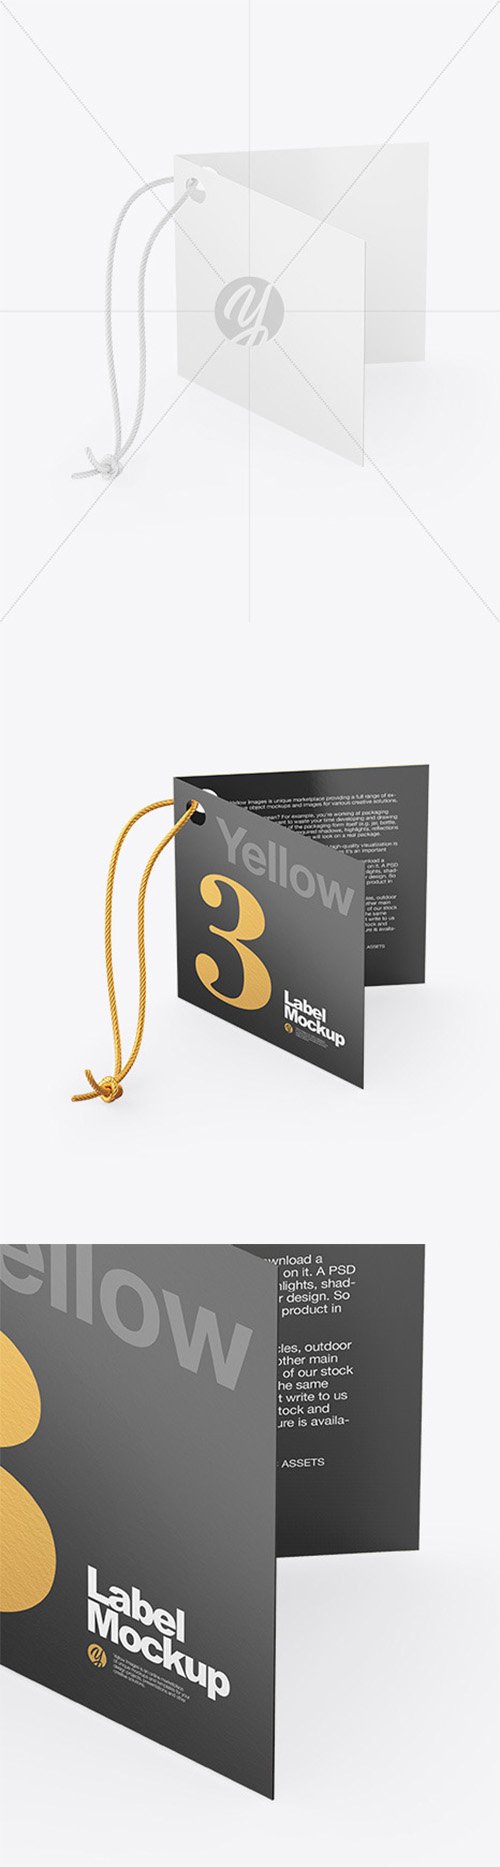 Textured Folded Label With Rope Mockup 66256 TIF